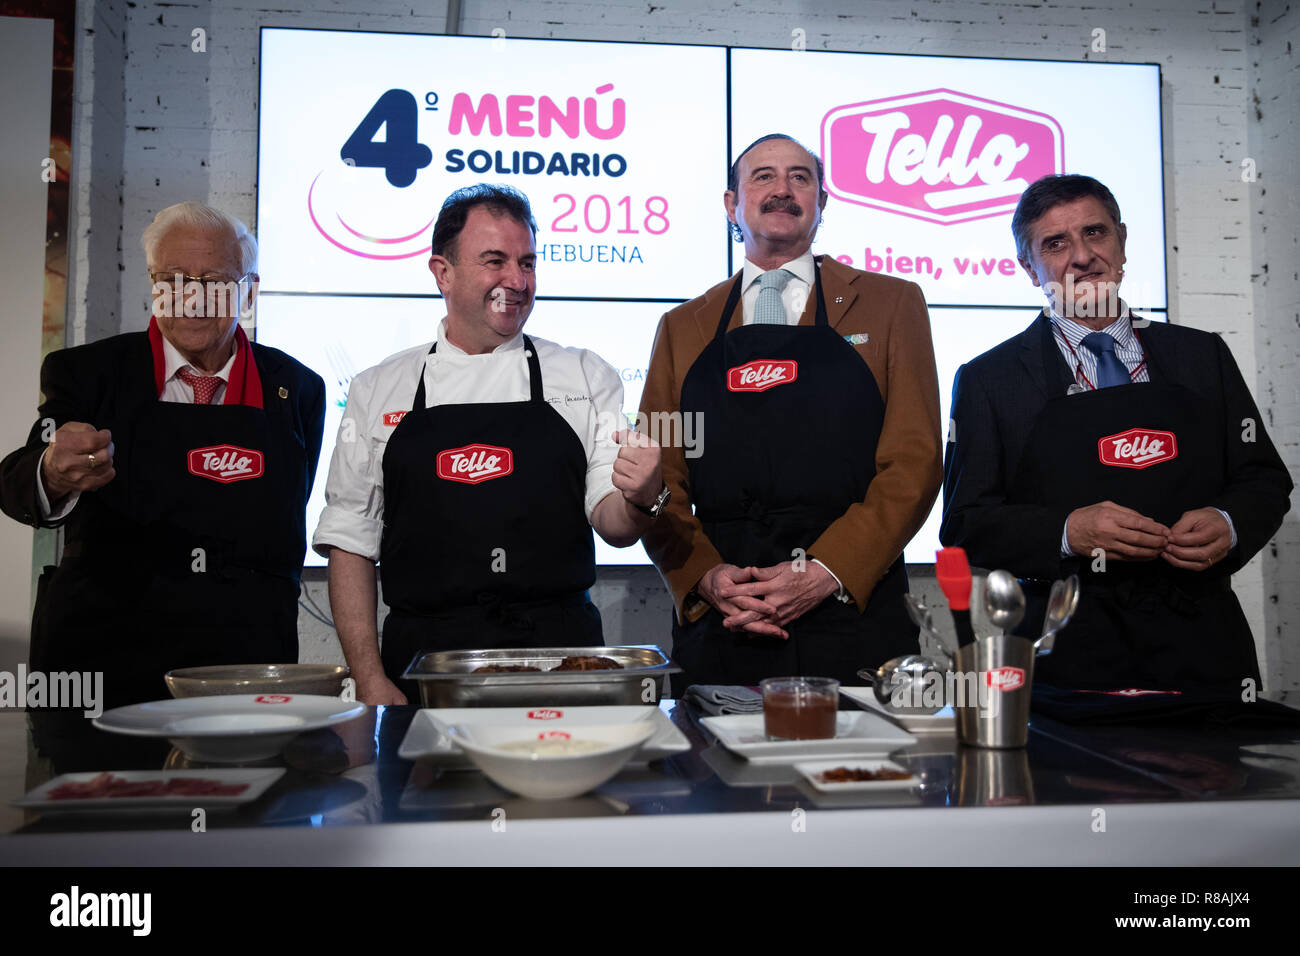 Madrid, Spain. 14th December, 2018. FATHER ANGEL, president of the NGO Mensajeros de la Paz(left), MARTIN BERASATEGUI, chef with 10 Michelin stars, DR MANUEL DE LA TORRE, President of the Foundation of Dr Manuel de la Torre and ALFONSO ALCAZAR, General Director of the Tello Alimentación Group. Presentation of the Menus Solidarios 2018 that will be offered to 250 people without resources at the Christmas Eve Dinner of Messengers of Peace and are prepared by Martín Berasategui on Dec 14, 2018 in Madrid, Spain Credit: Jesús Hellin/Alamy Live News Stock Photo